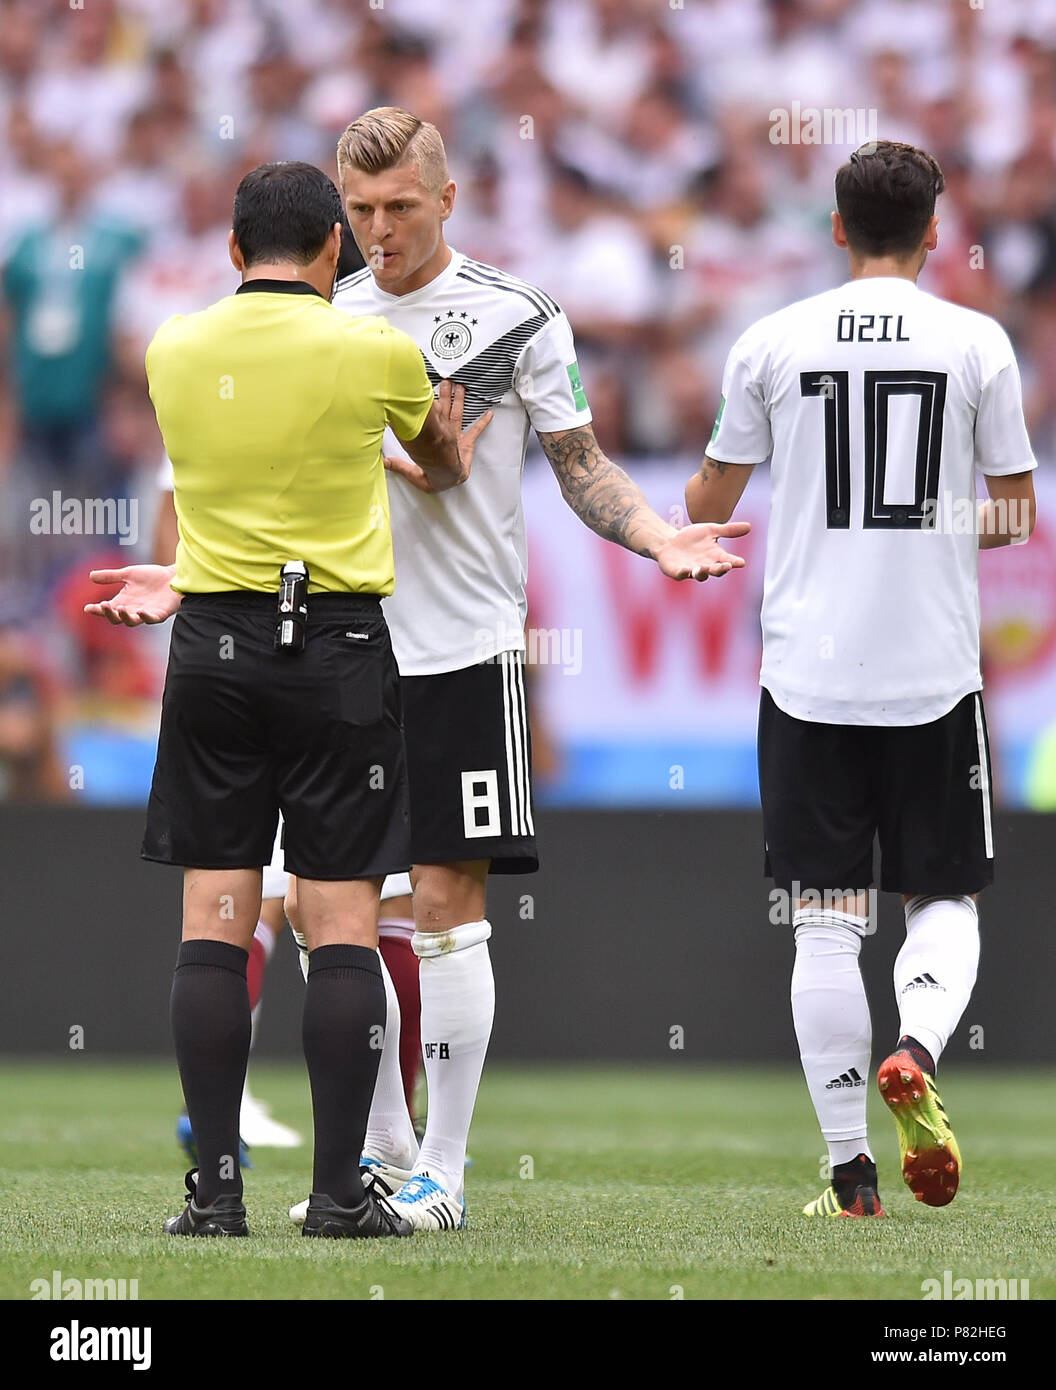 MOSCOW, RUSSIA - JUNE 17: Toni Kroos of Germany reacts during the 2018 FIFA World Cup Russia group F match between Germany and Mexico at Luzhniki Stadium on June 17, 2018 in Moscow, Russia. (Photo by Lukasz Laskowski/PressFocus/MB Media) Stock Photo